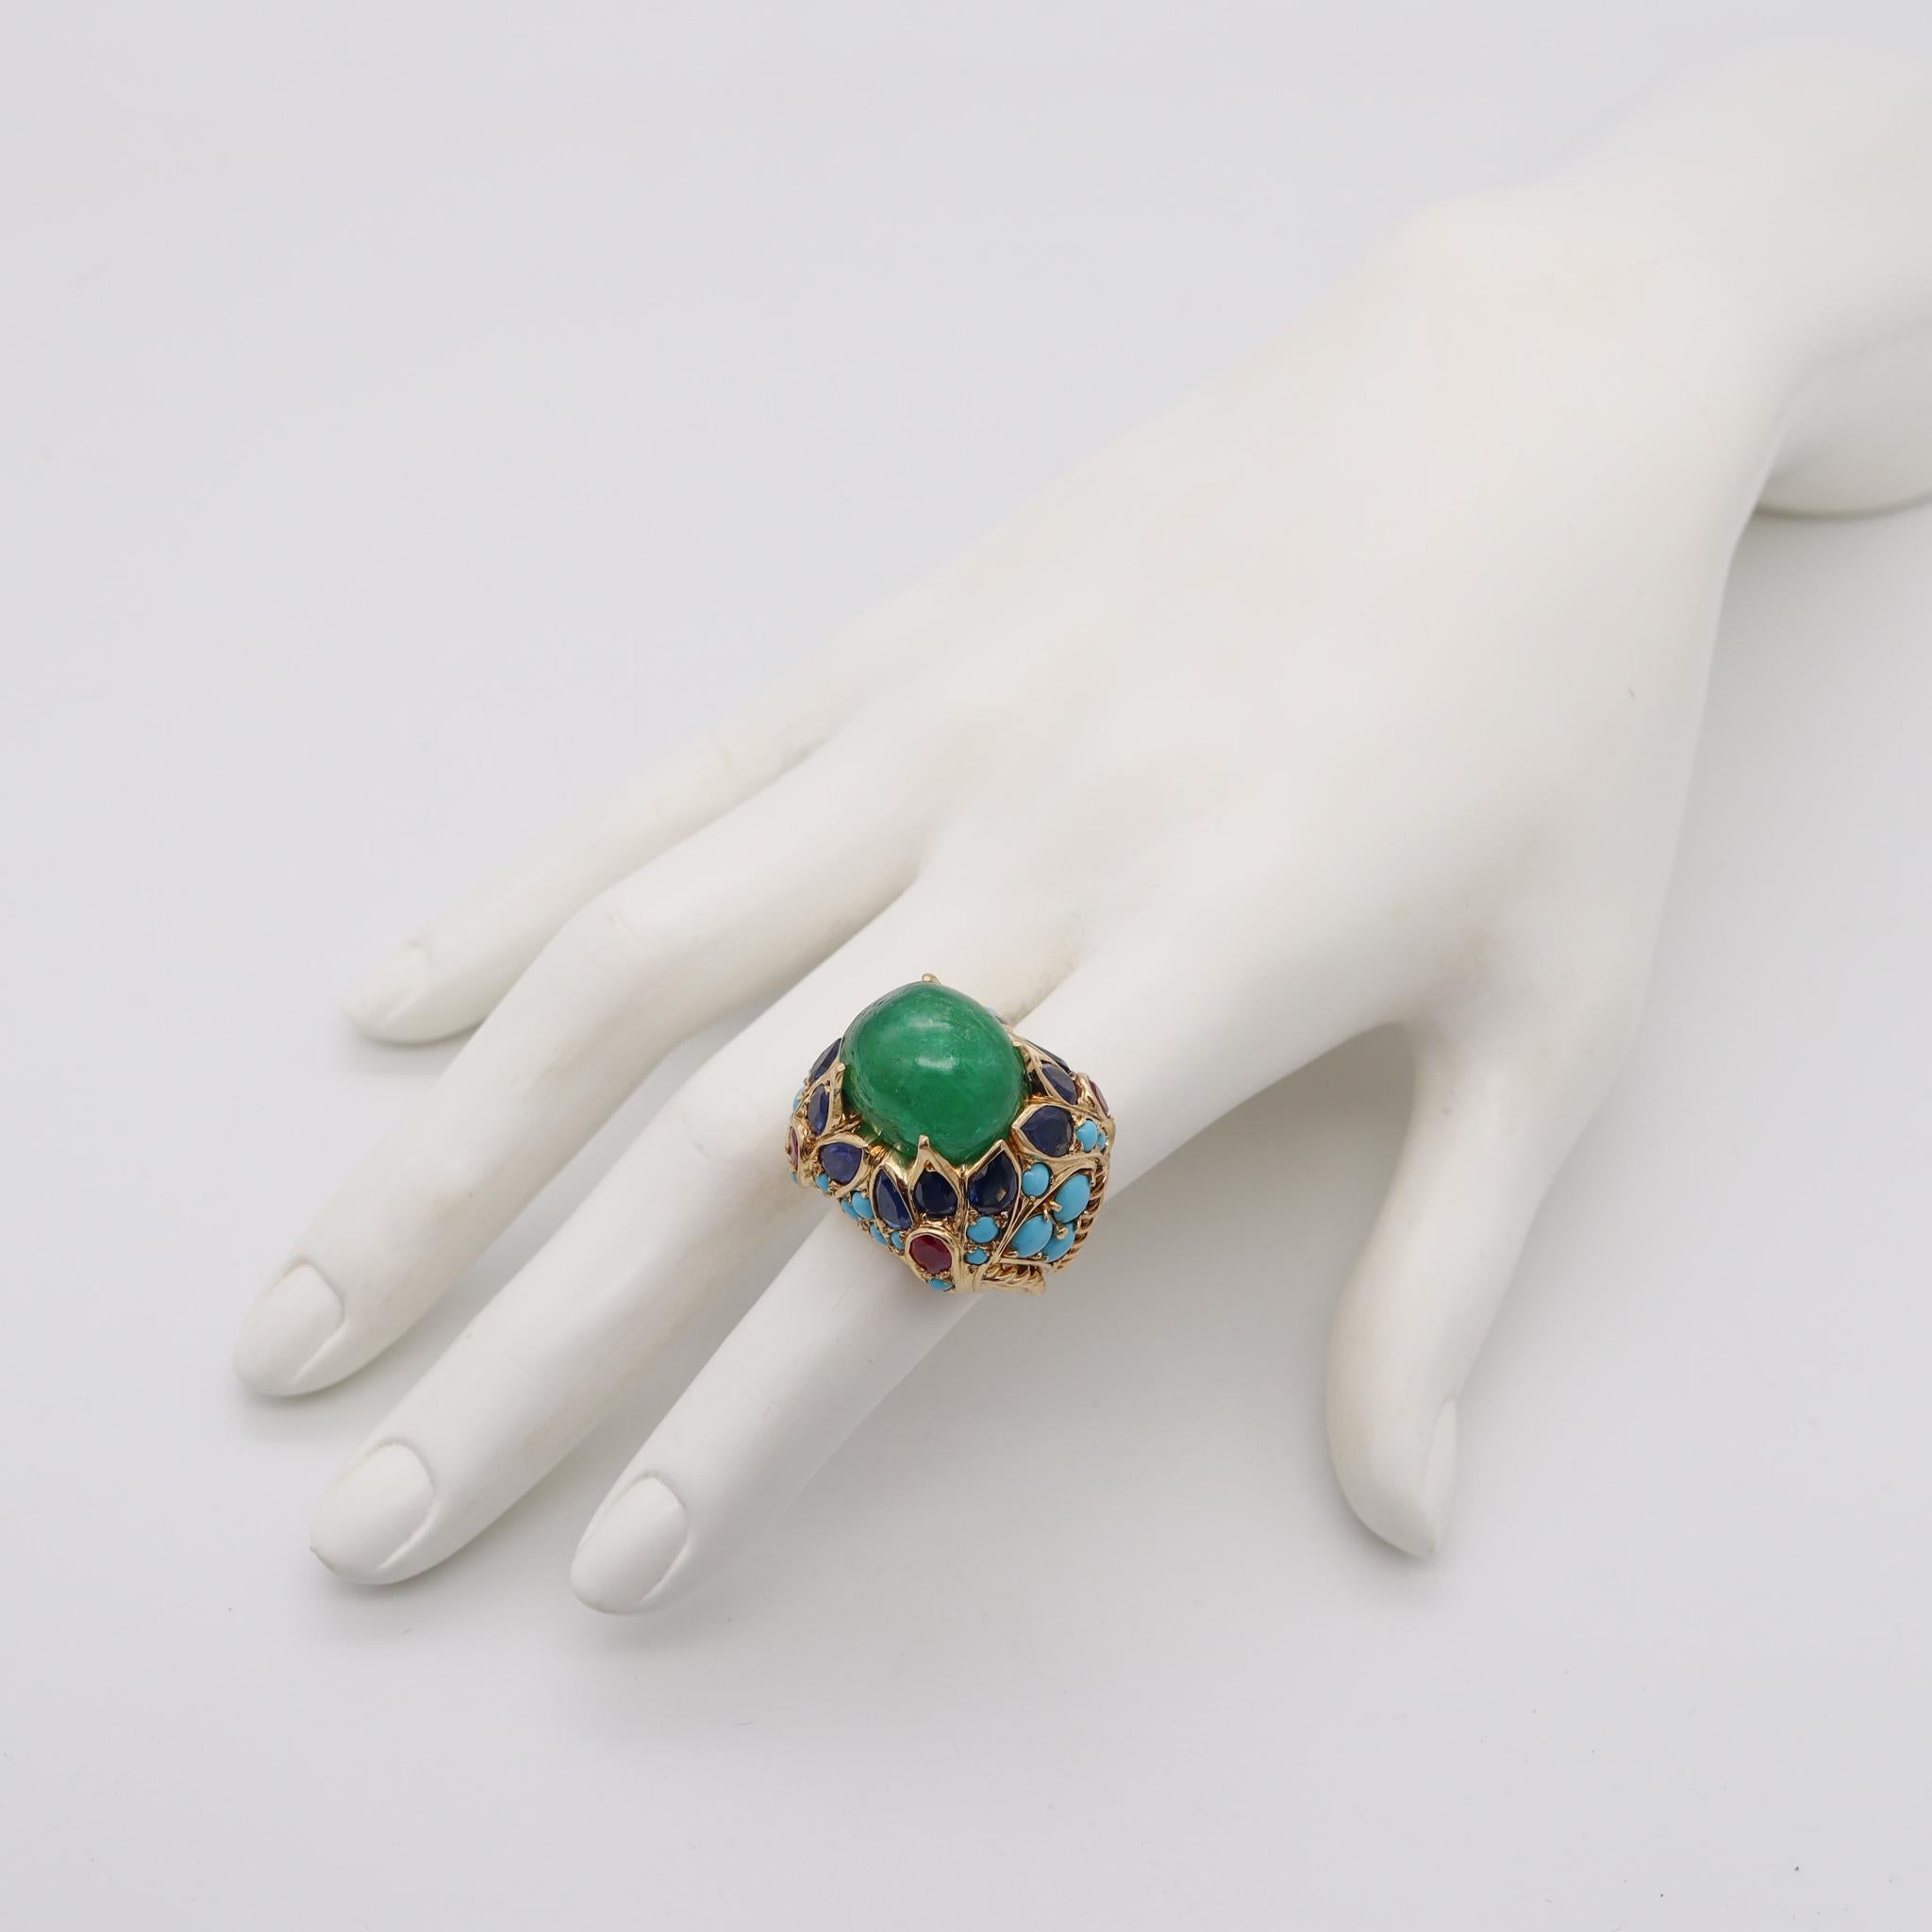 Tutti-Frutti gem set cocktail ring.

Fabulous domed colorful piece, created in Italy with the popular Mughal tutti-frutti patterns, back in the 1960's. This gorgeous oversized cocktail ring has been carefully crafted in solid yellow gold of 18